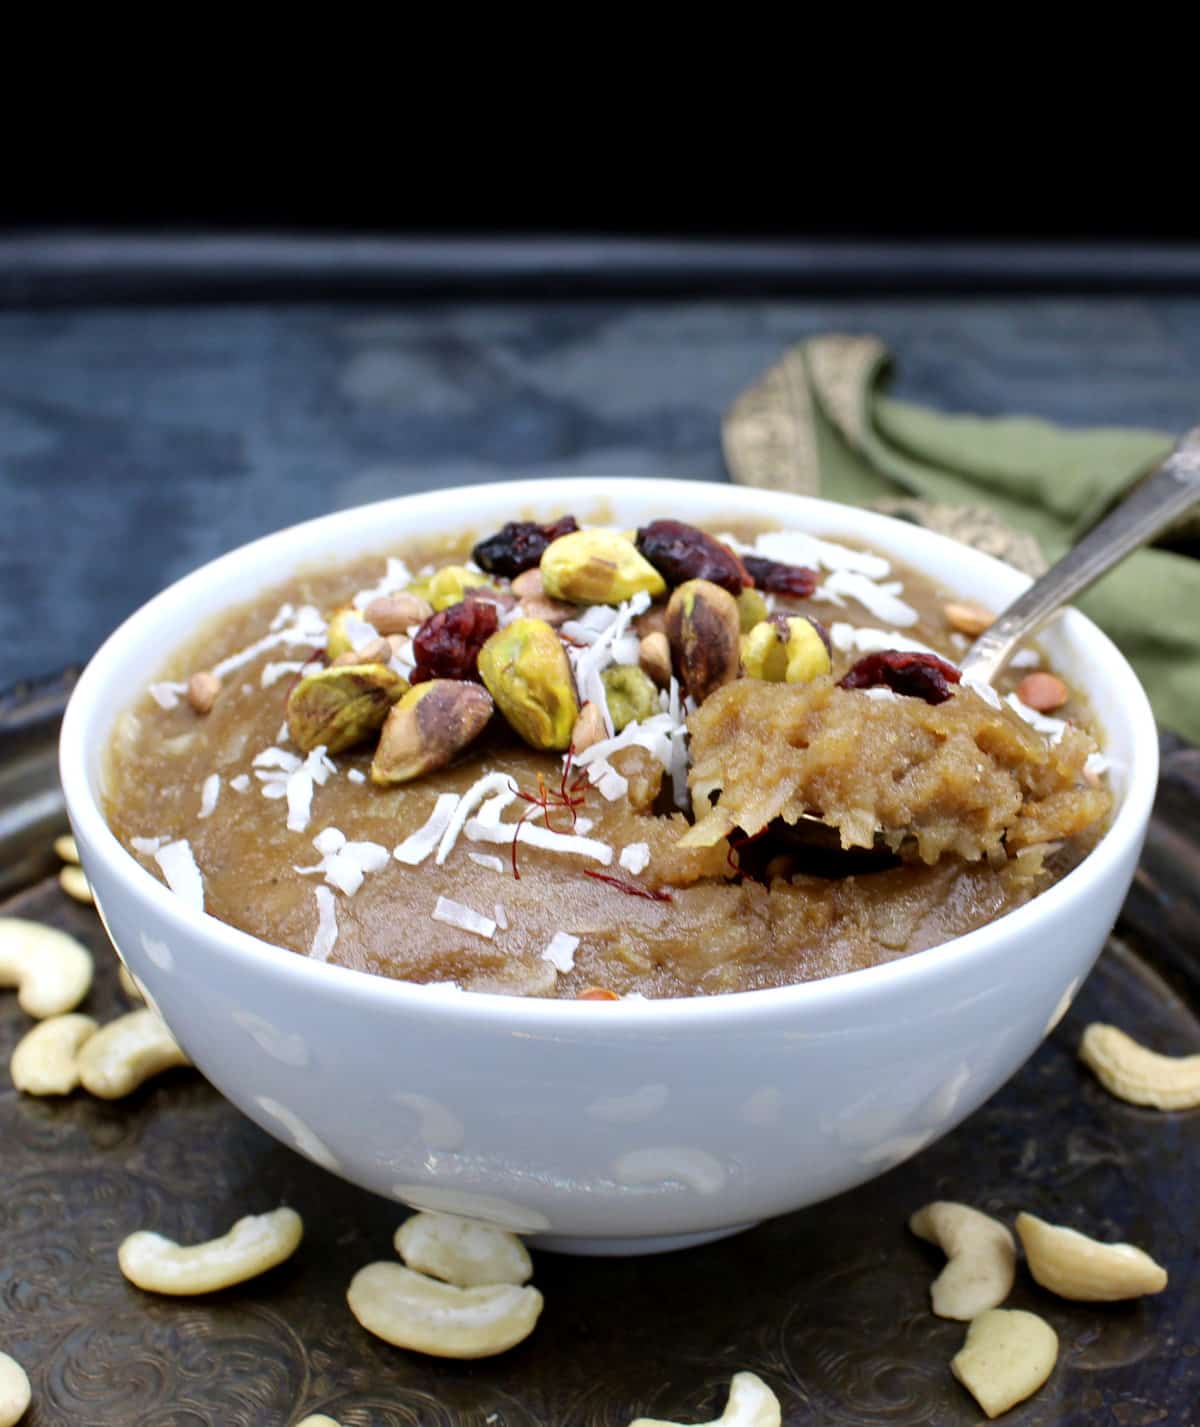 Front photo of a bowl of vegan cashew halwa garnished with nuts, dry fruits and coconut flakes with a green napkin.